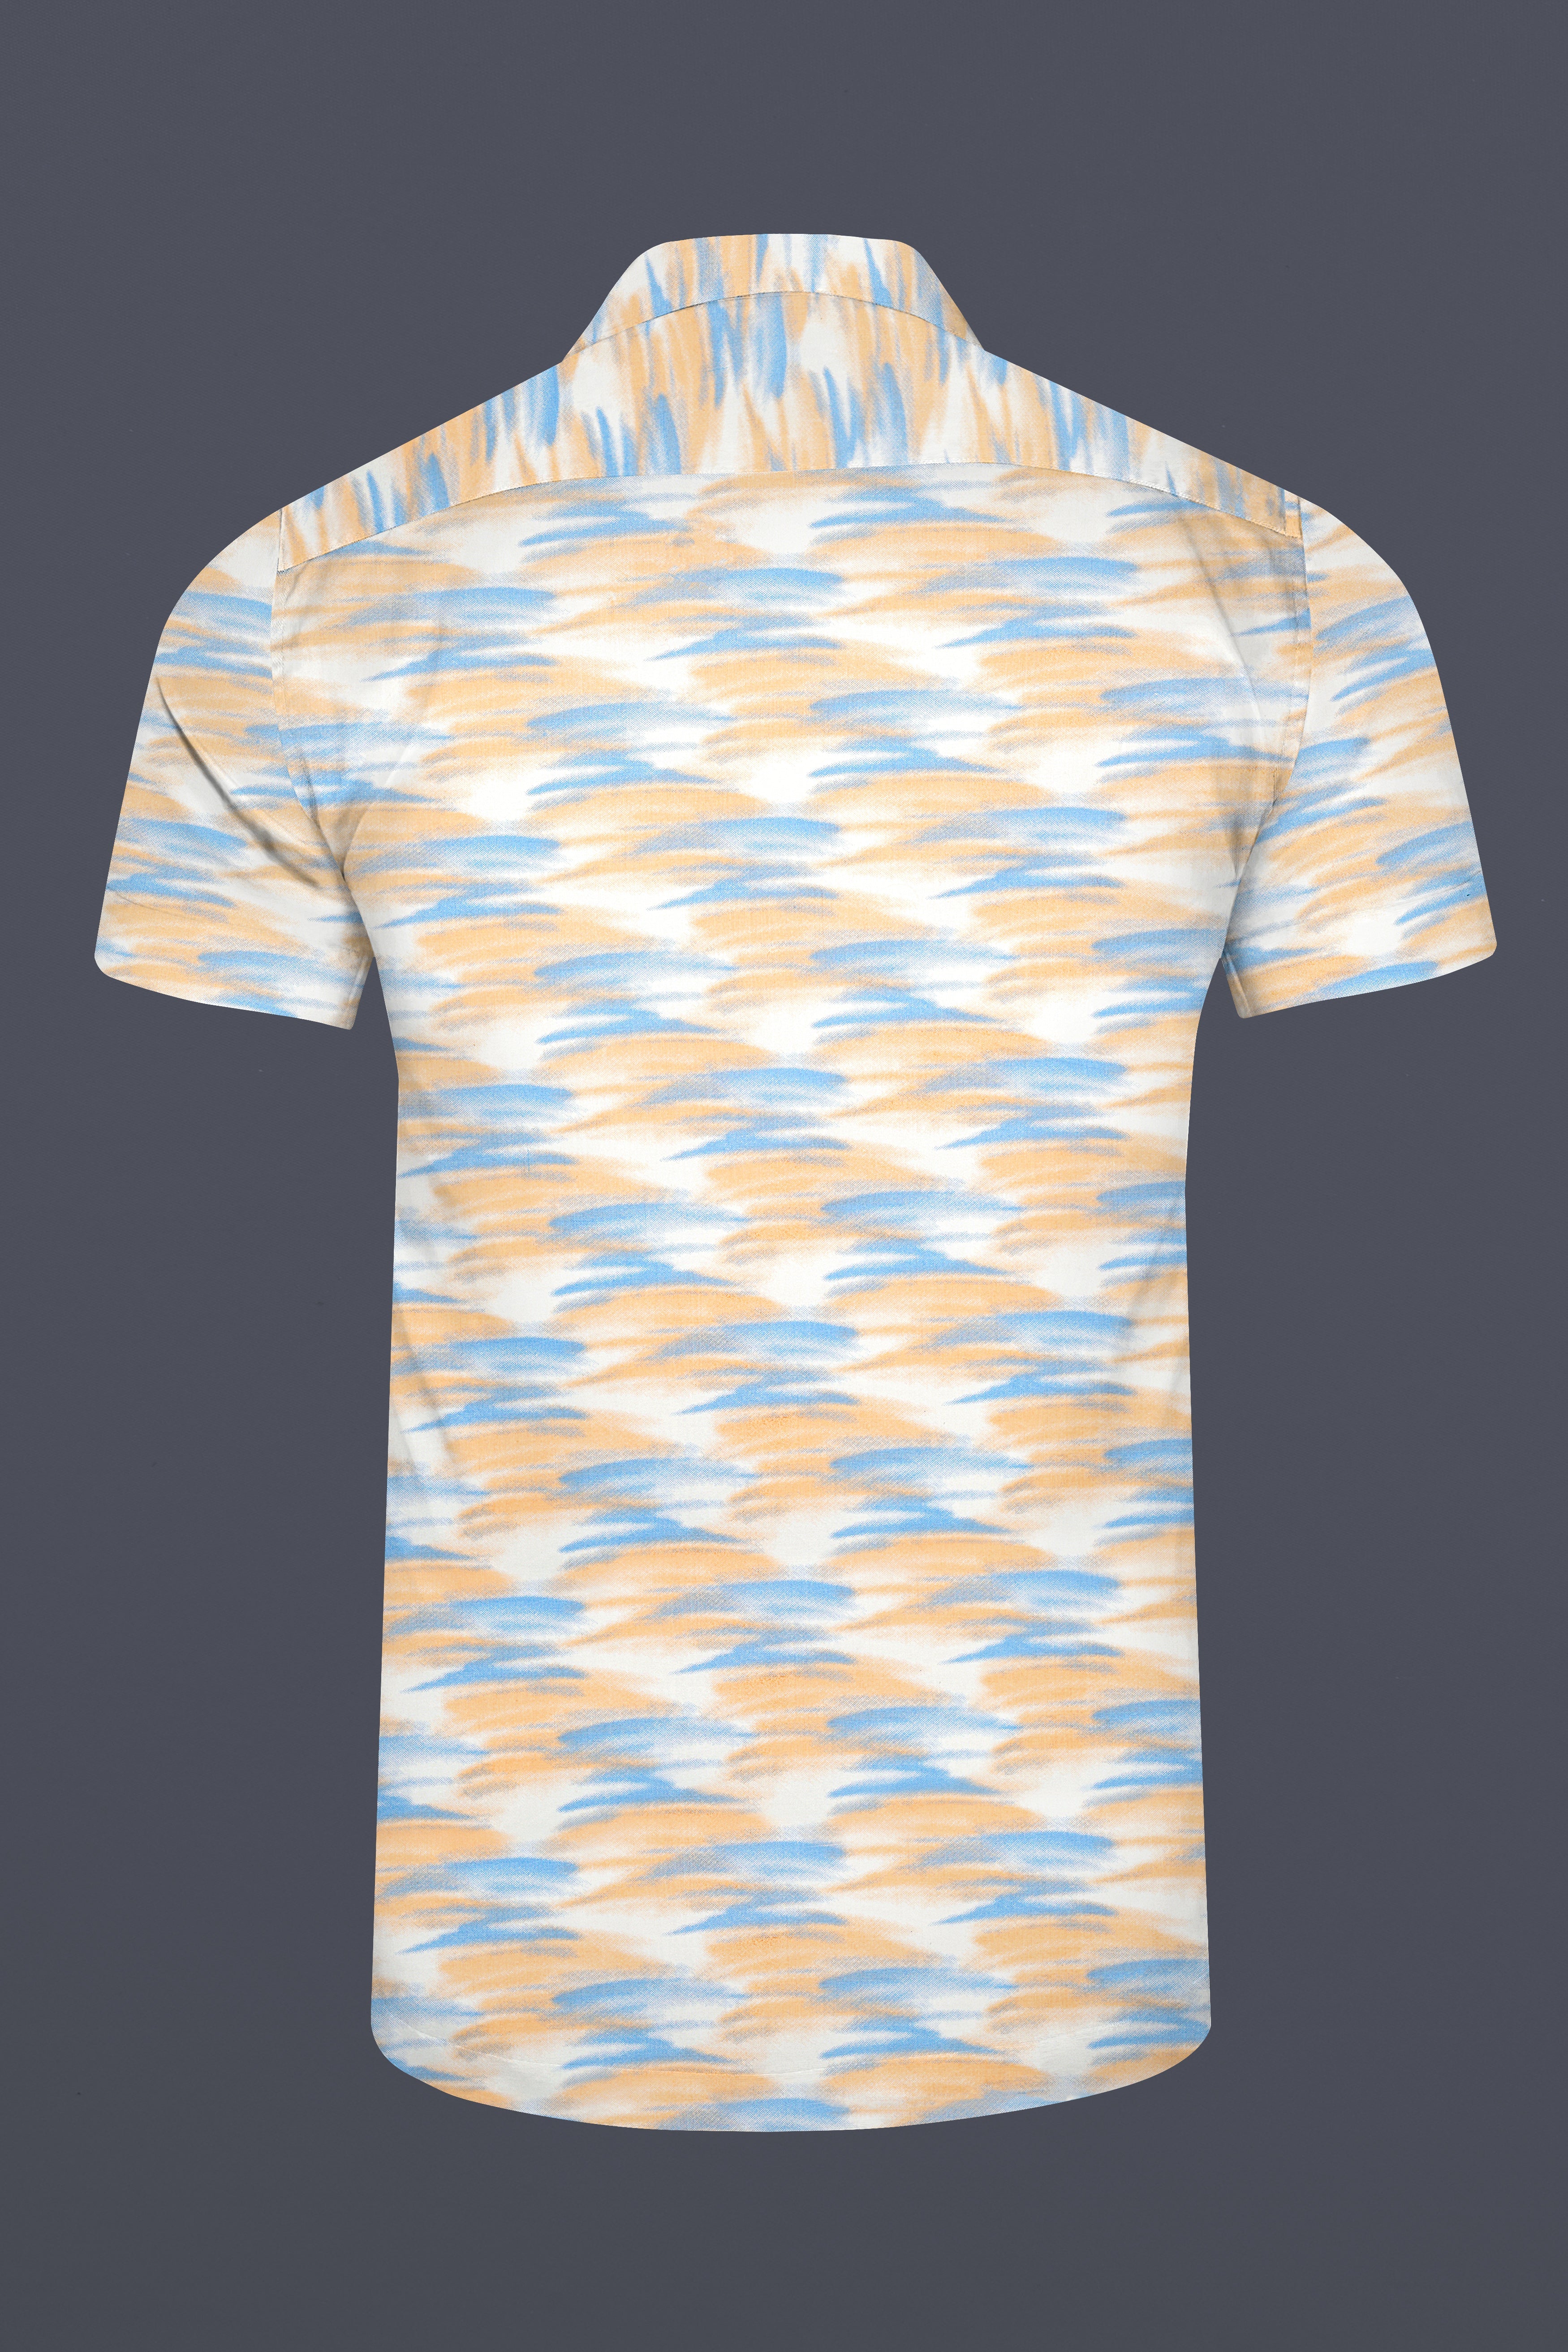 Marzipan Orange with Glacier Blue and White Abstract Printed Super Soft Premium Cotton Shirt